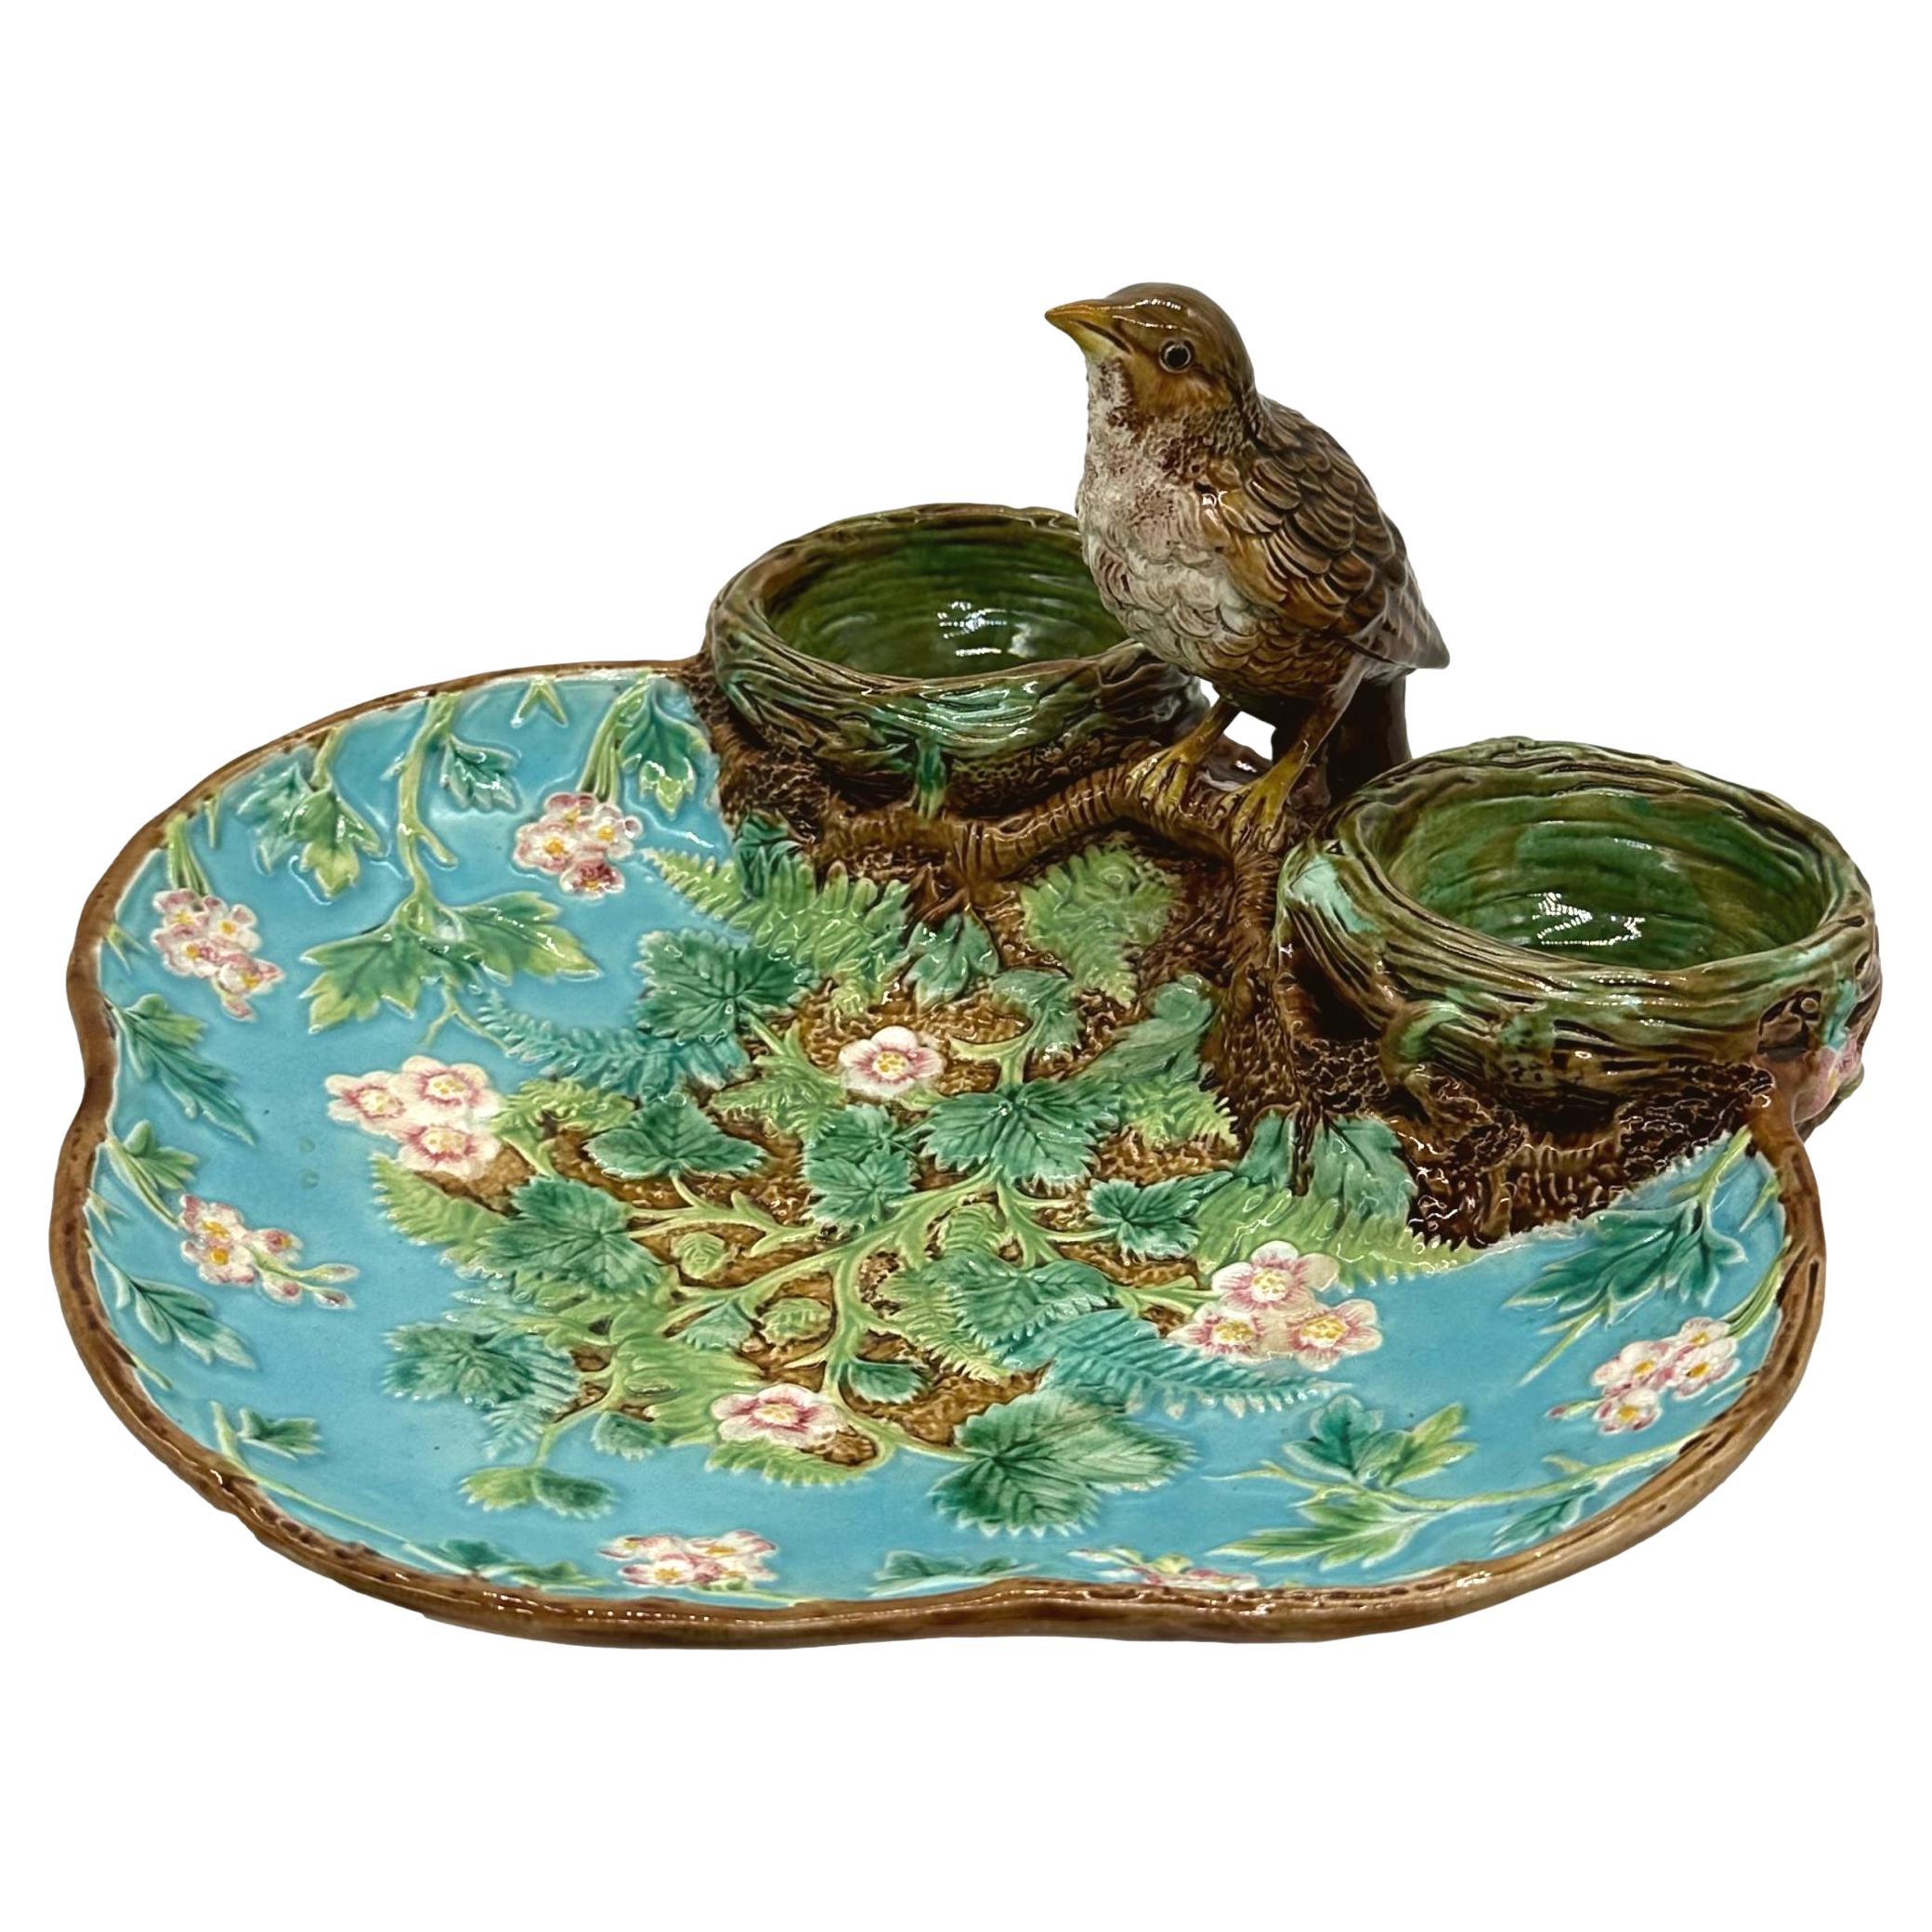 George Jones Majolica Strawberry Server Mounted by a Bird, English, circa 1870 For Sale